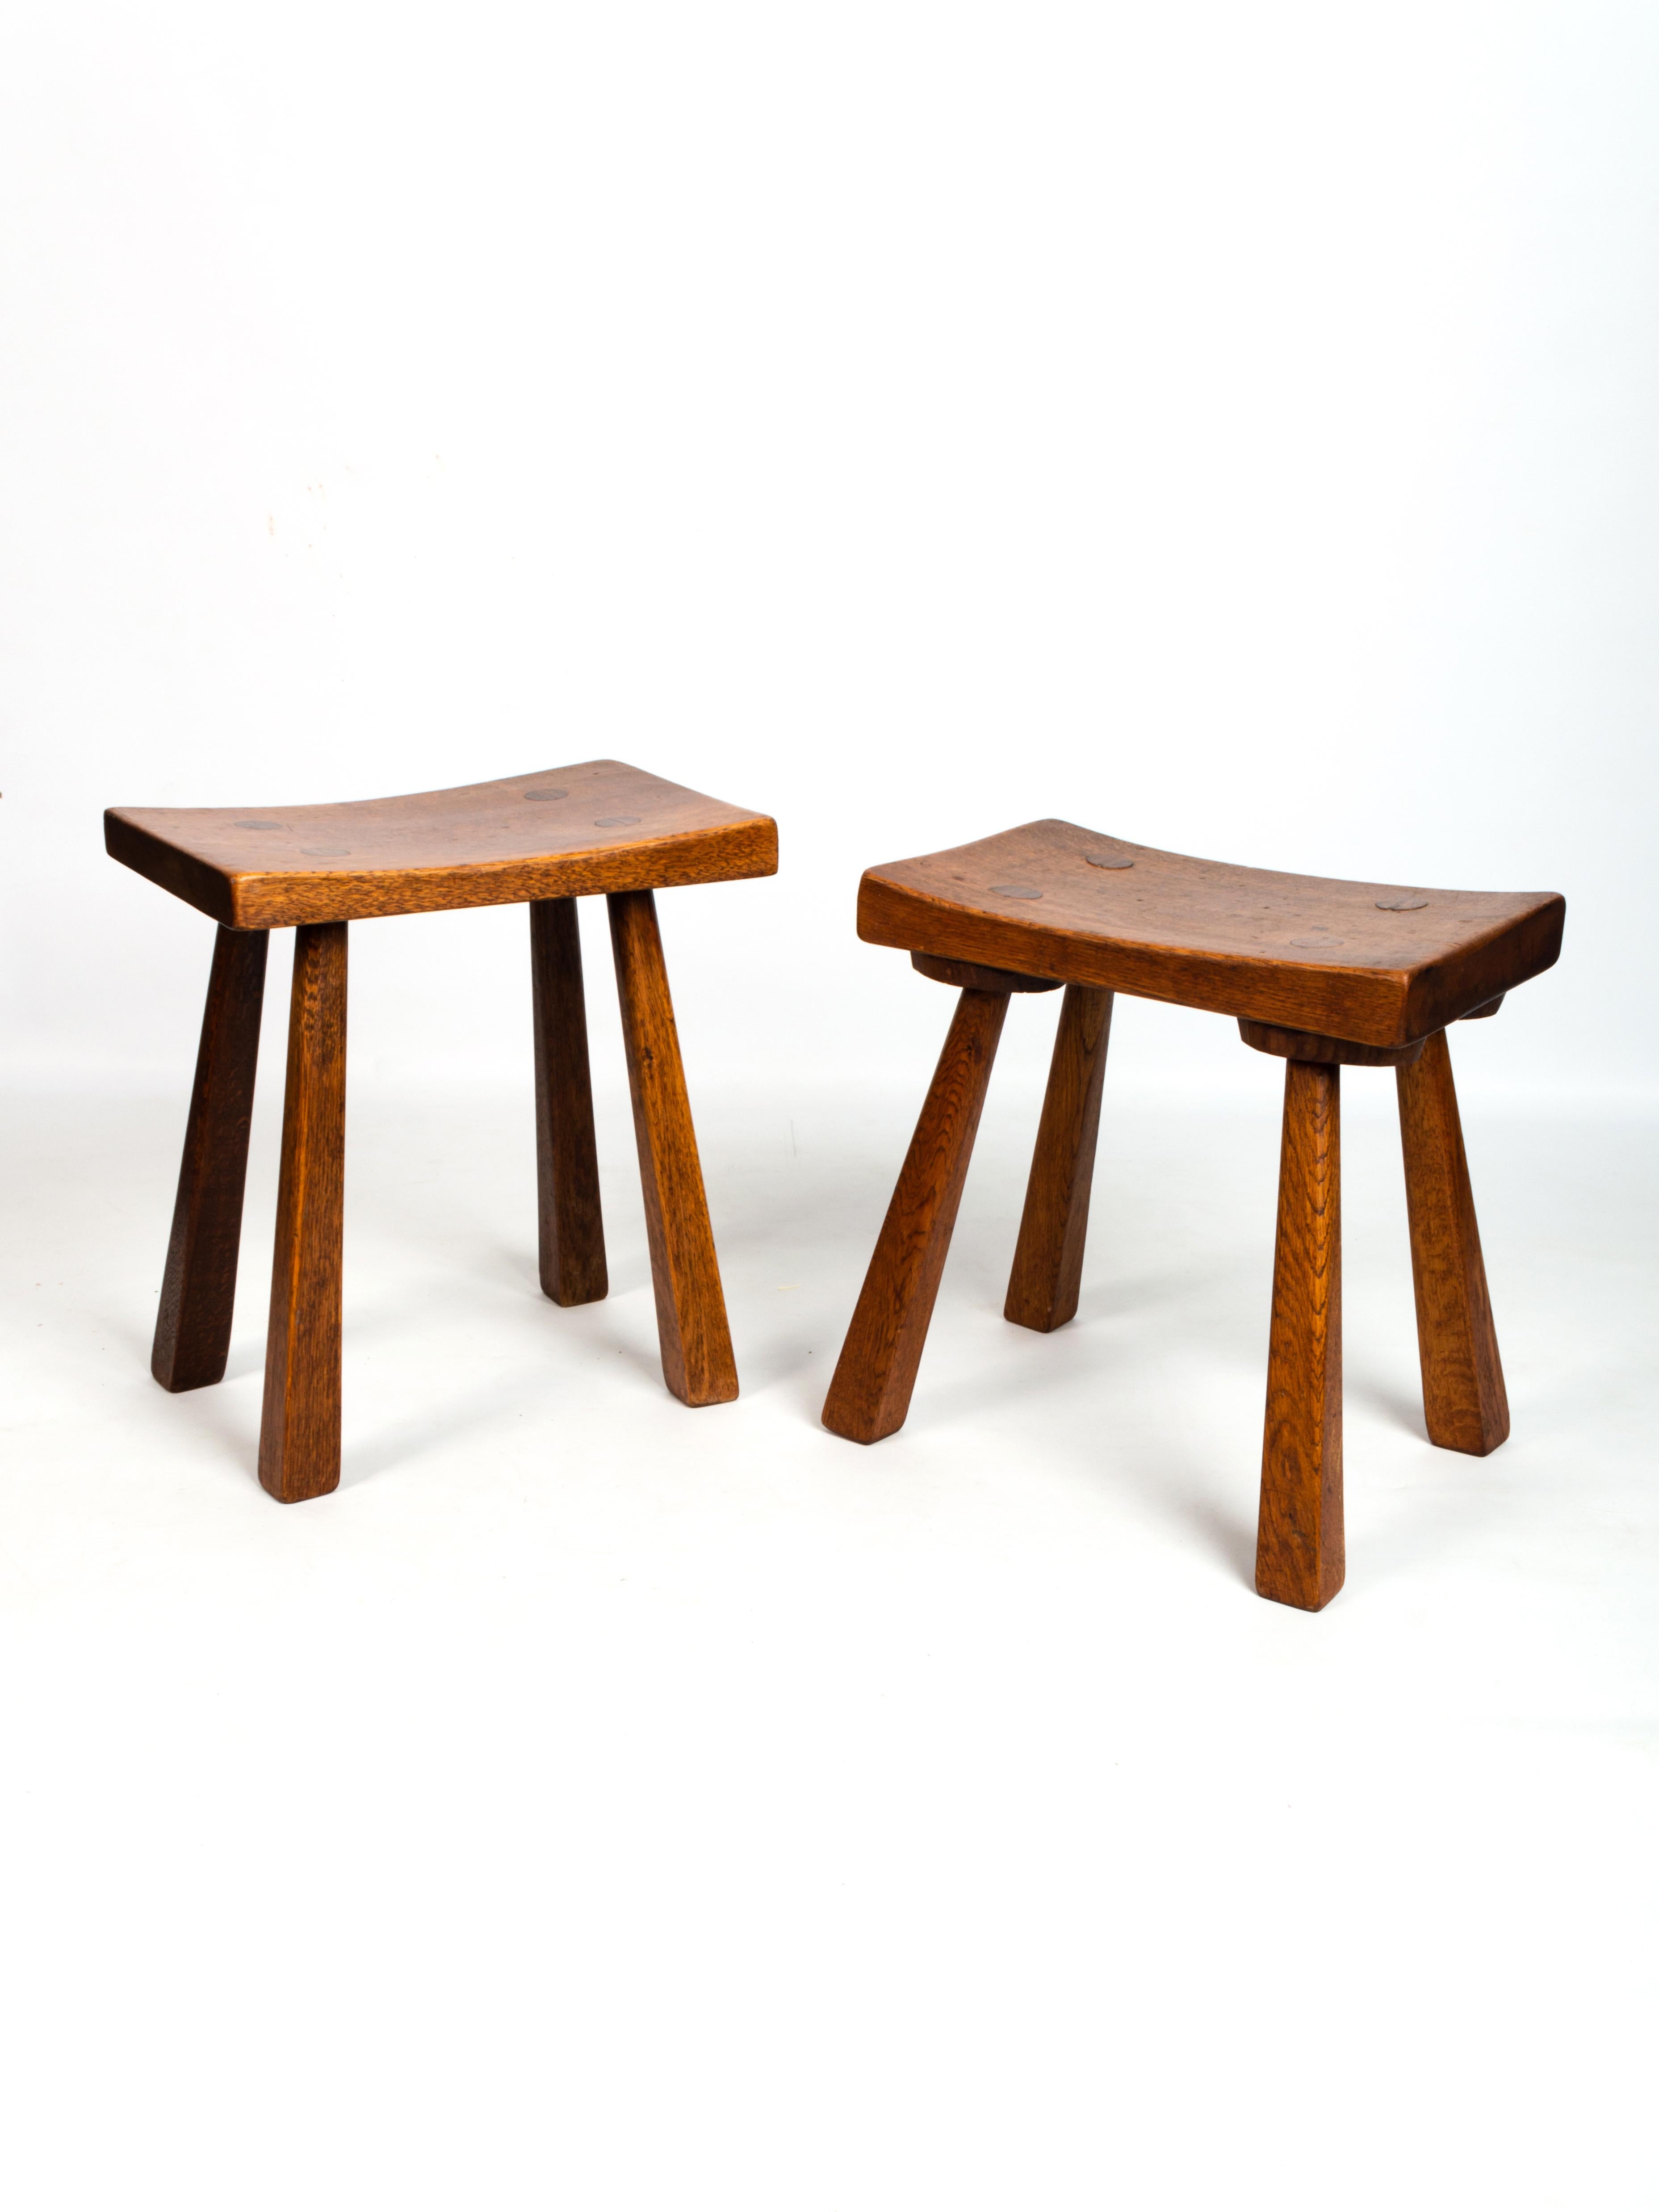 Pair English Arts & Crafts Cotswolds School Oak Stools End Tables, C.1950

A near pair. Good solid construction in excellent condition commensurate with age.

Dimensions:

1: L41 x D25.5 x H45cm

2: L41 x D25.5 x H42.5cm